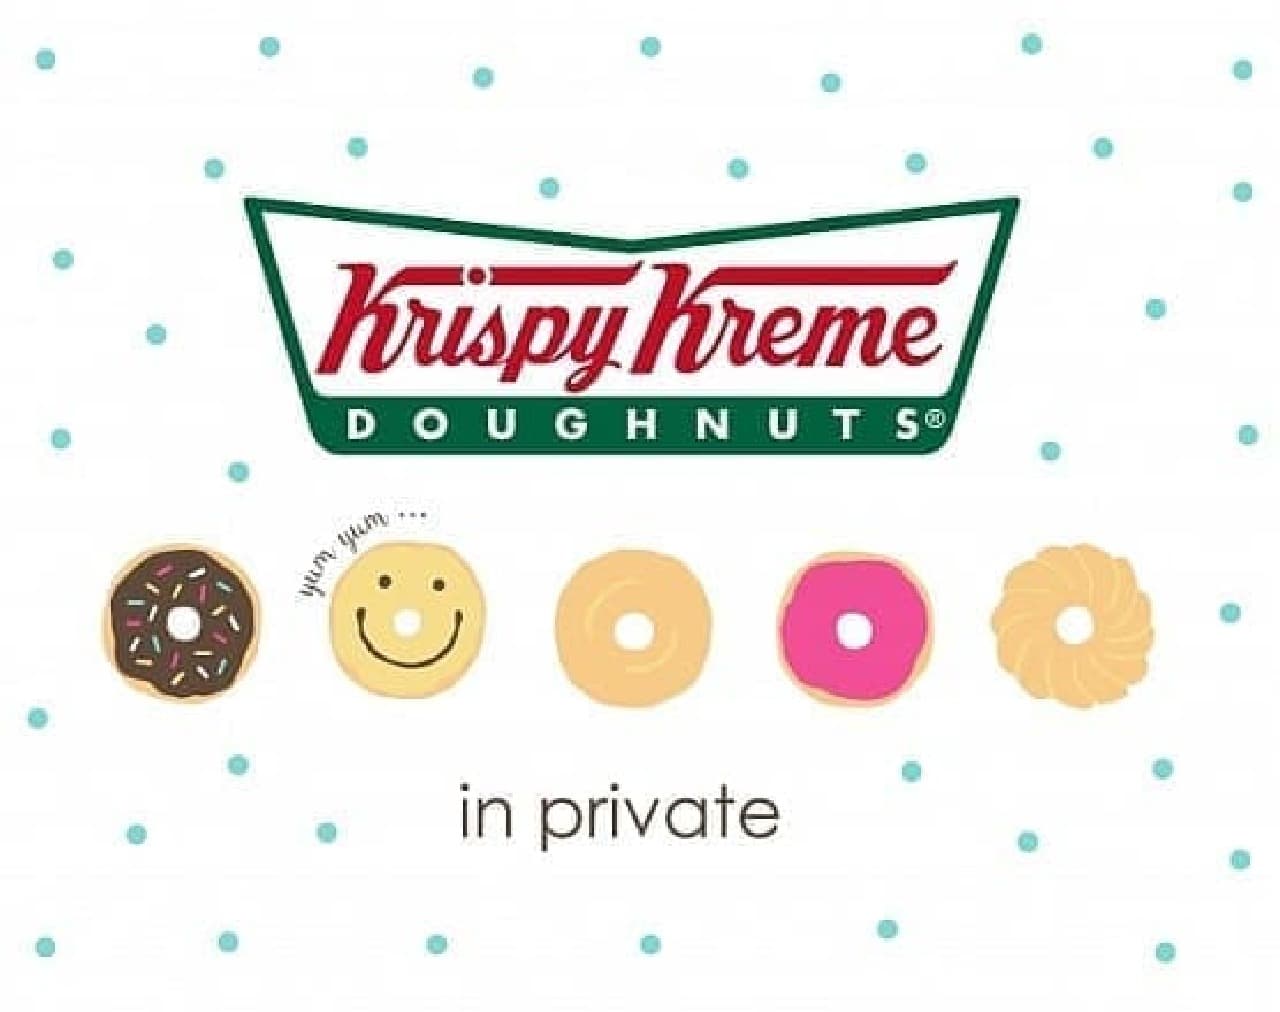 Krispy Kreme Donuts Collaborate with "In Private"